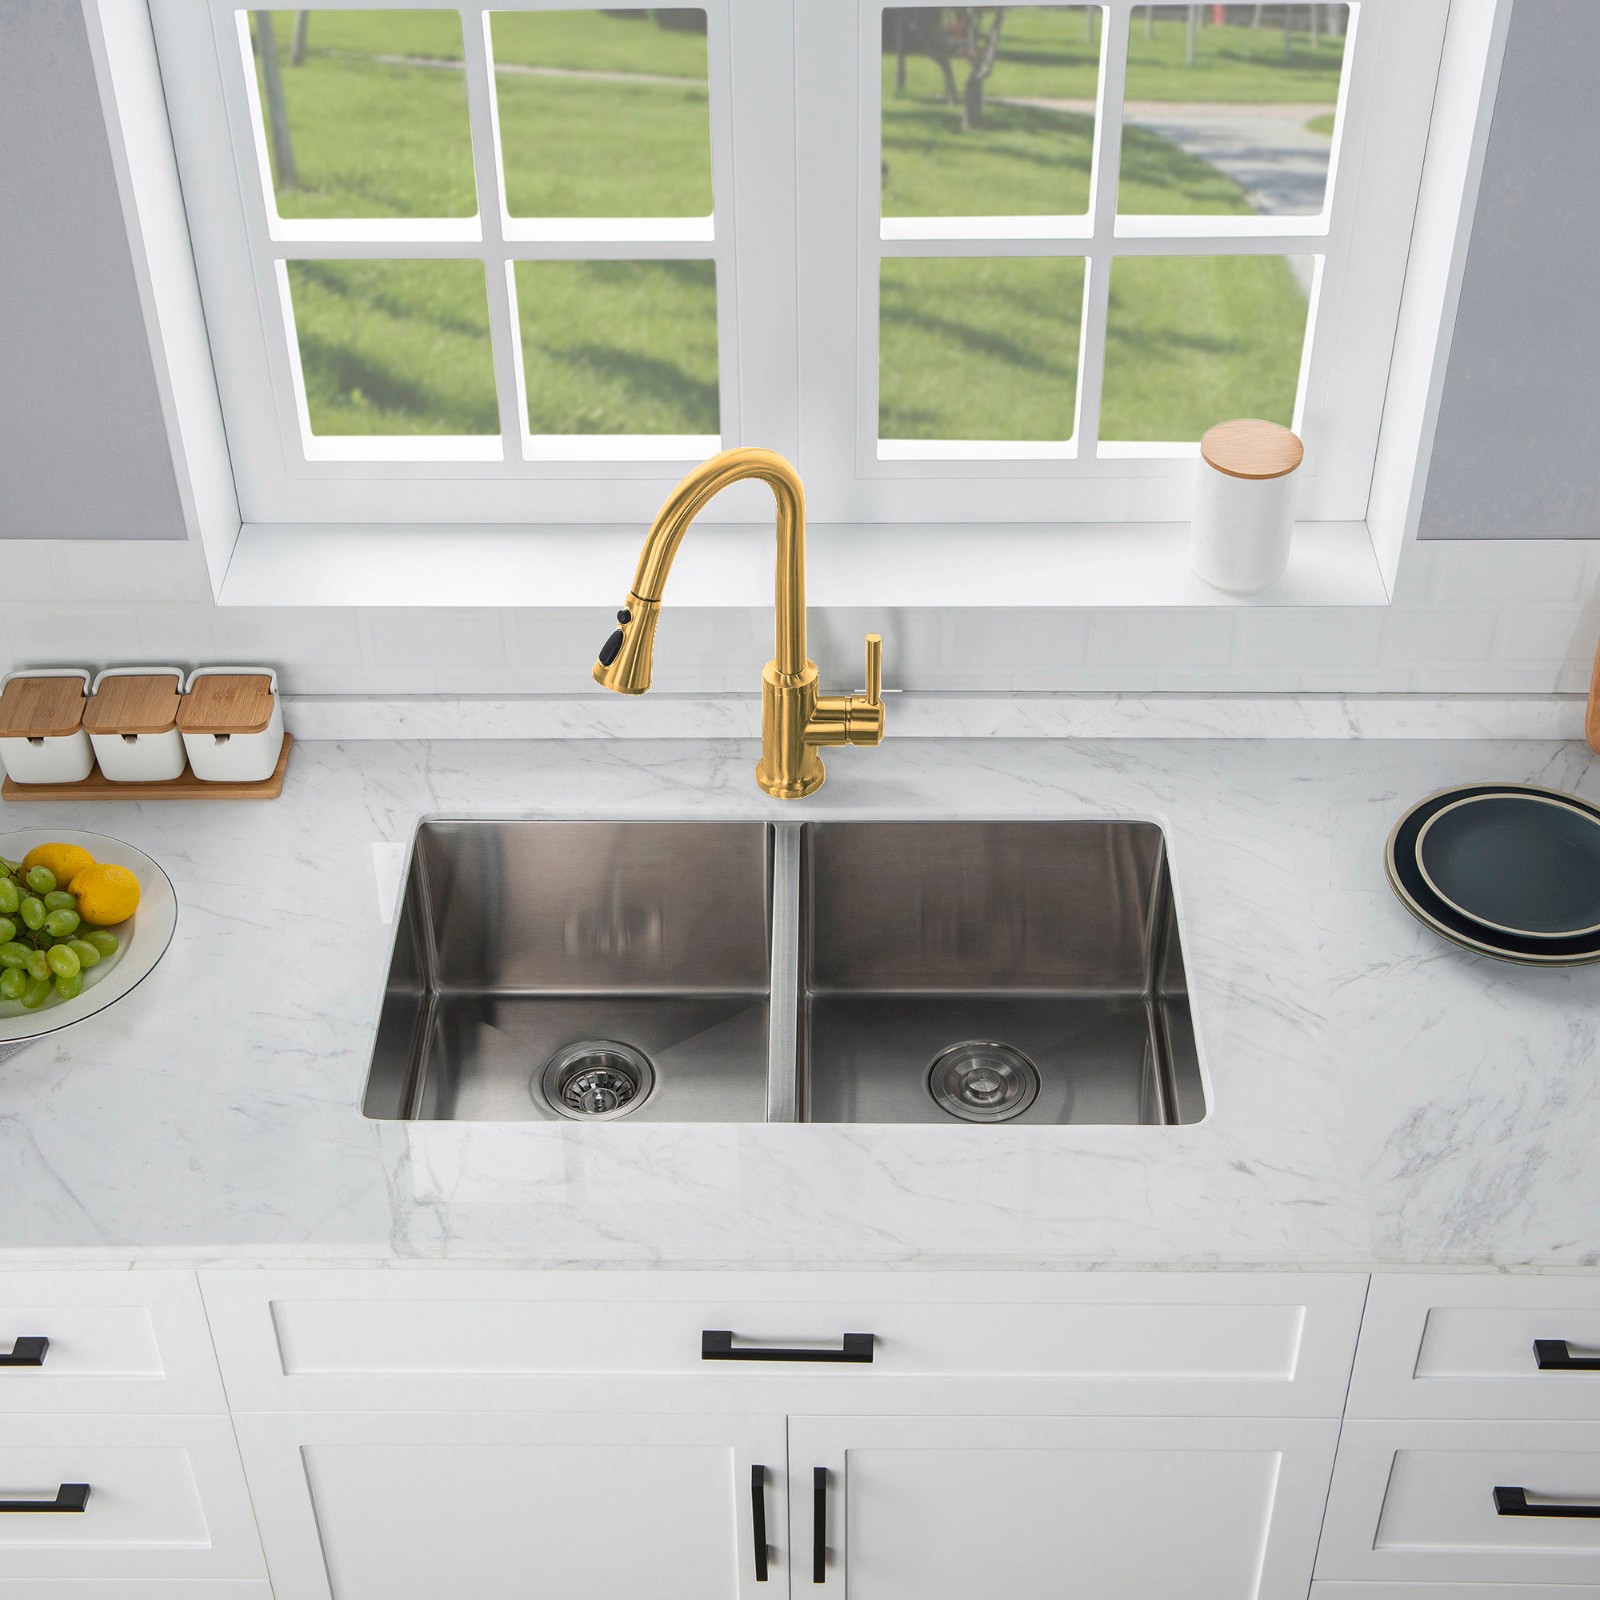  WOODBRIDGE WK101201BG Stainless Steel Single Handle Pull Down Kitchen Faucet in Brushed Gold Finish._5001